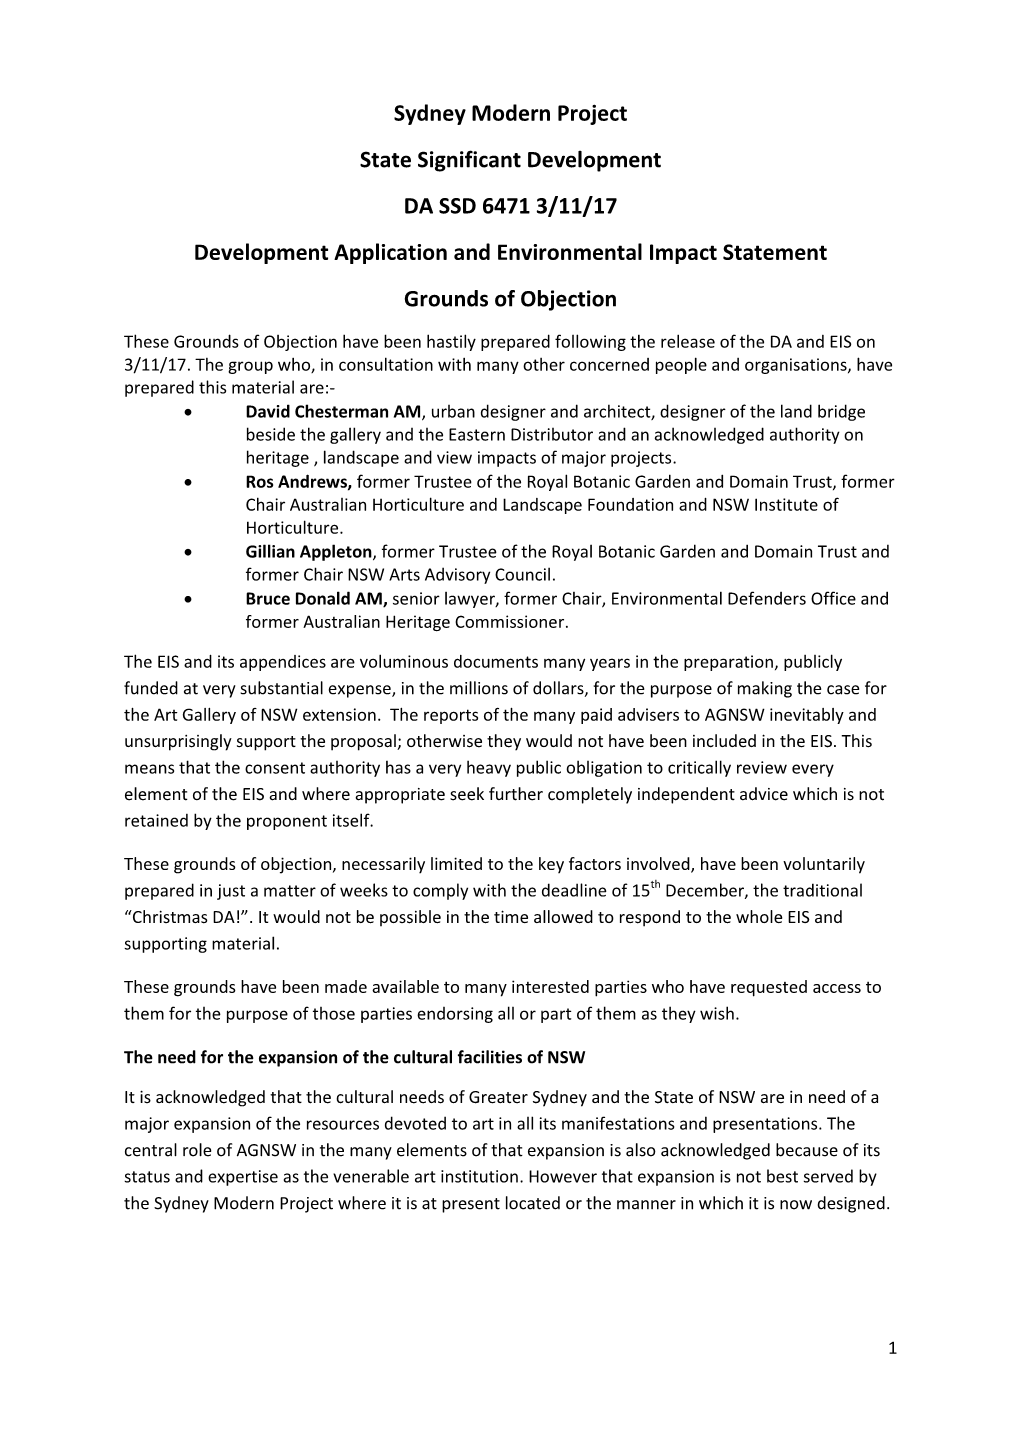 Sydney Modern Project State Significant Development DA SSD 6471 3/11/17 Development Application and Environmental Impact Statement Grounds of Objection